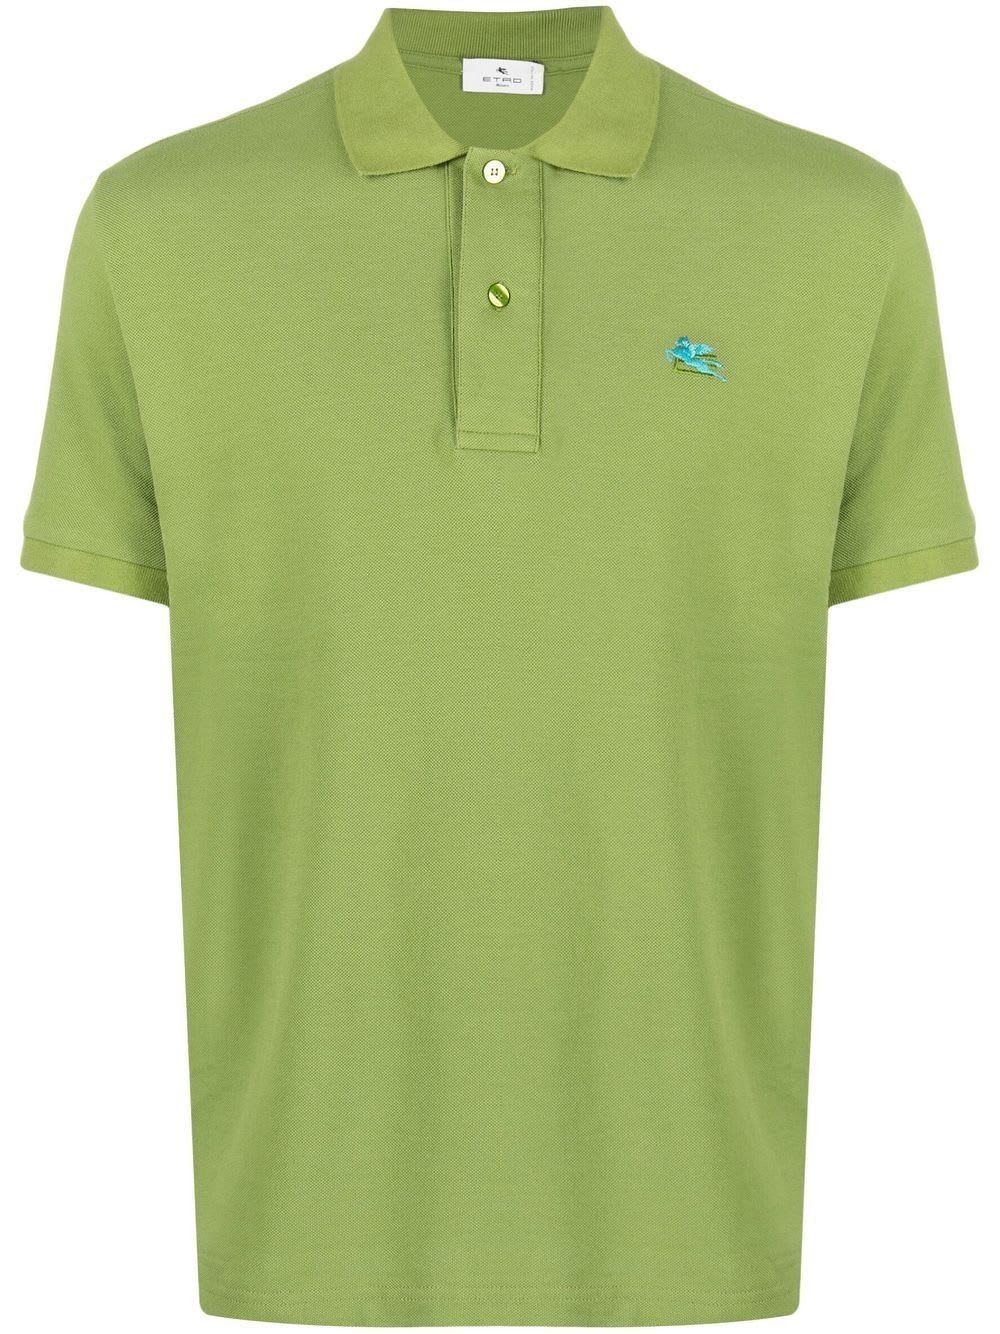 Etro Man Short Sleeve Polo Shirt In Light Green Piquet With Light Blue Pegasus Embroidery